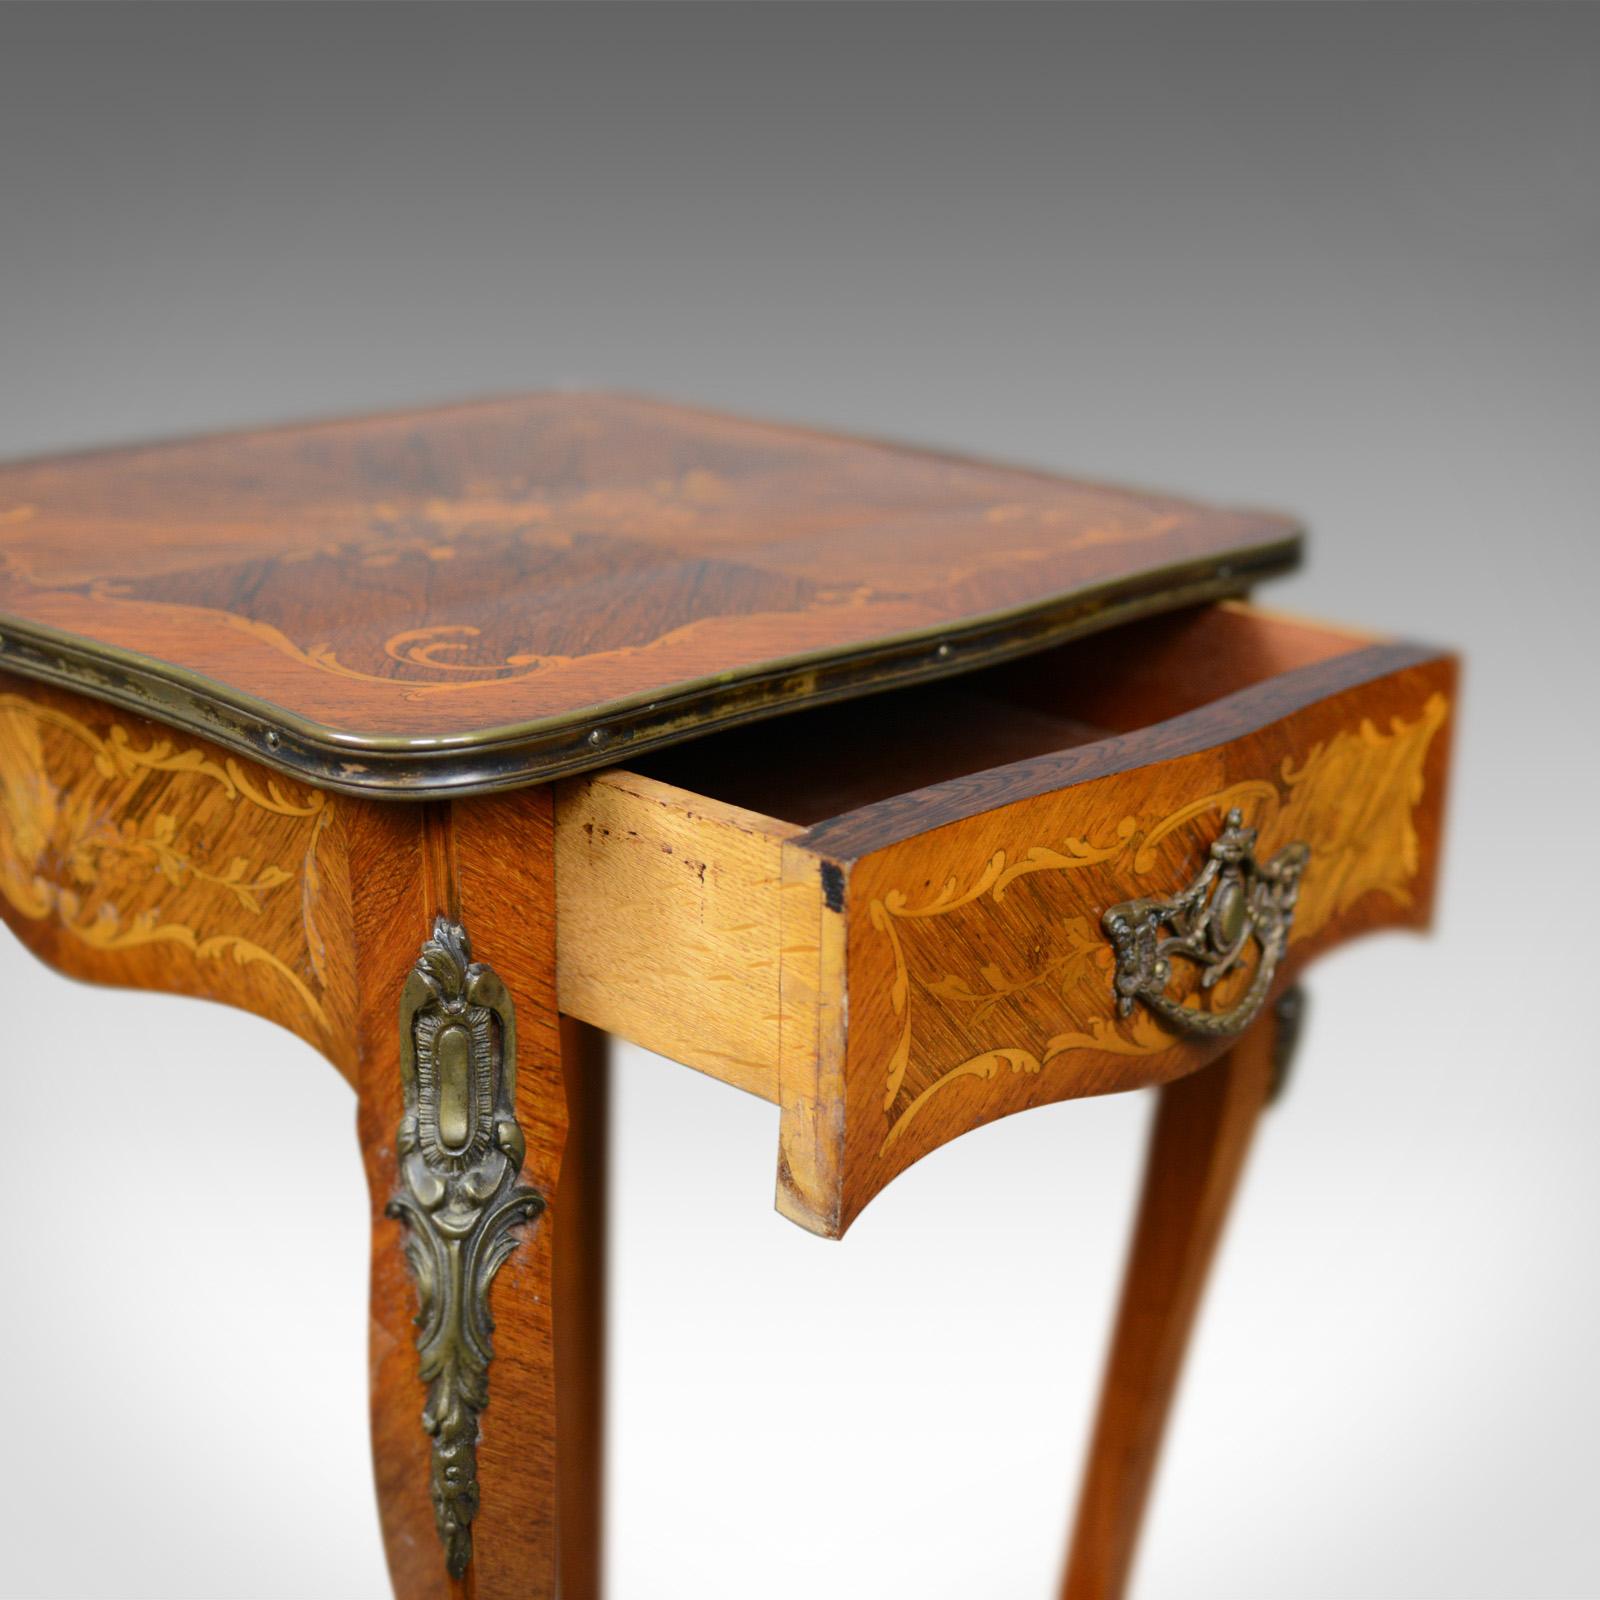 Inlay French Antique Étagère, Kingwood Side Table, Nightstand, Druce & Co., circa 1870